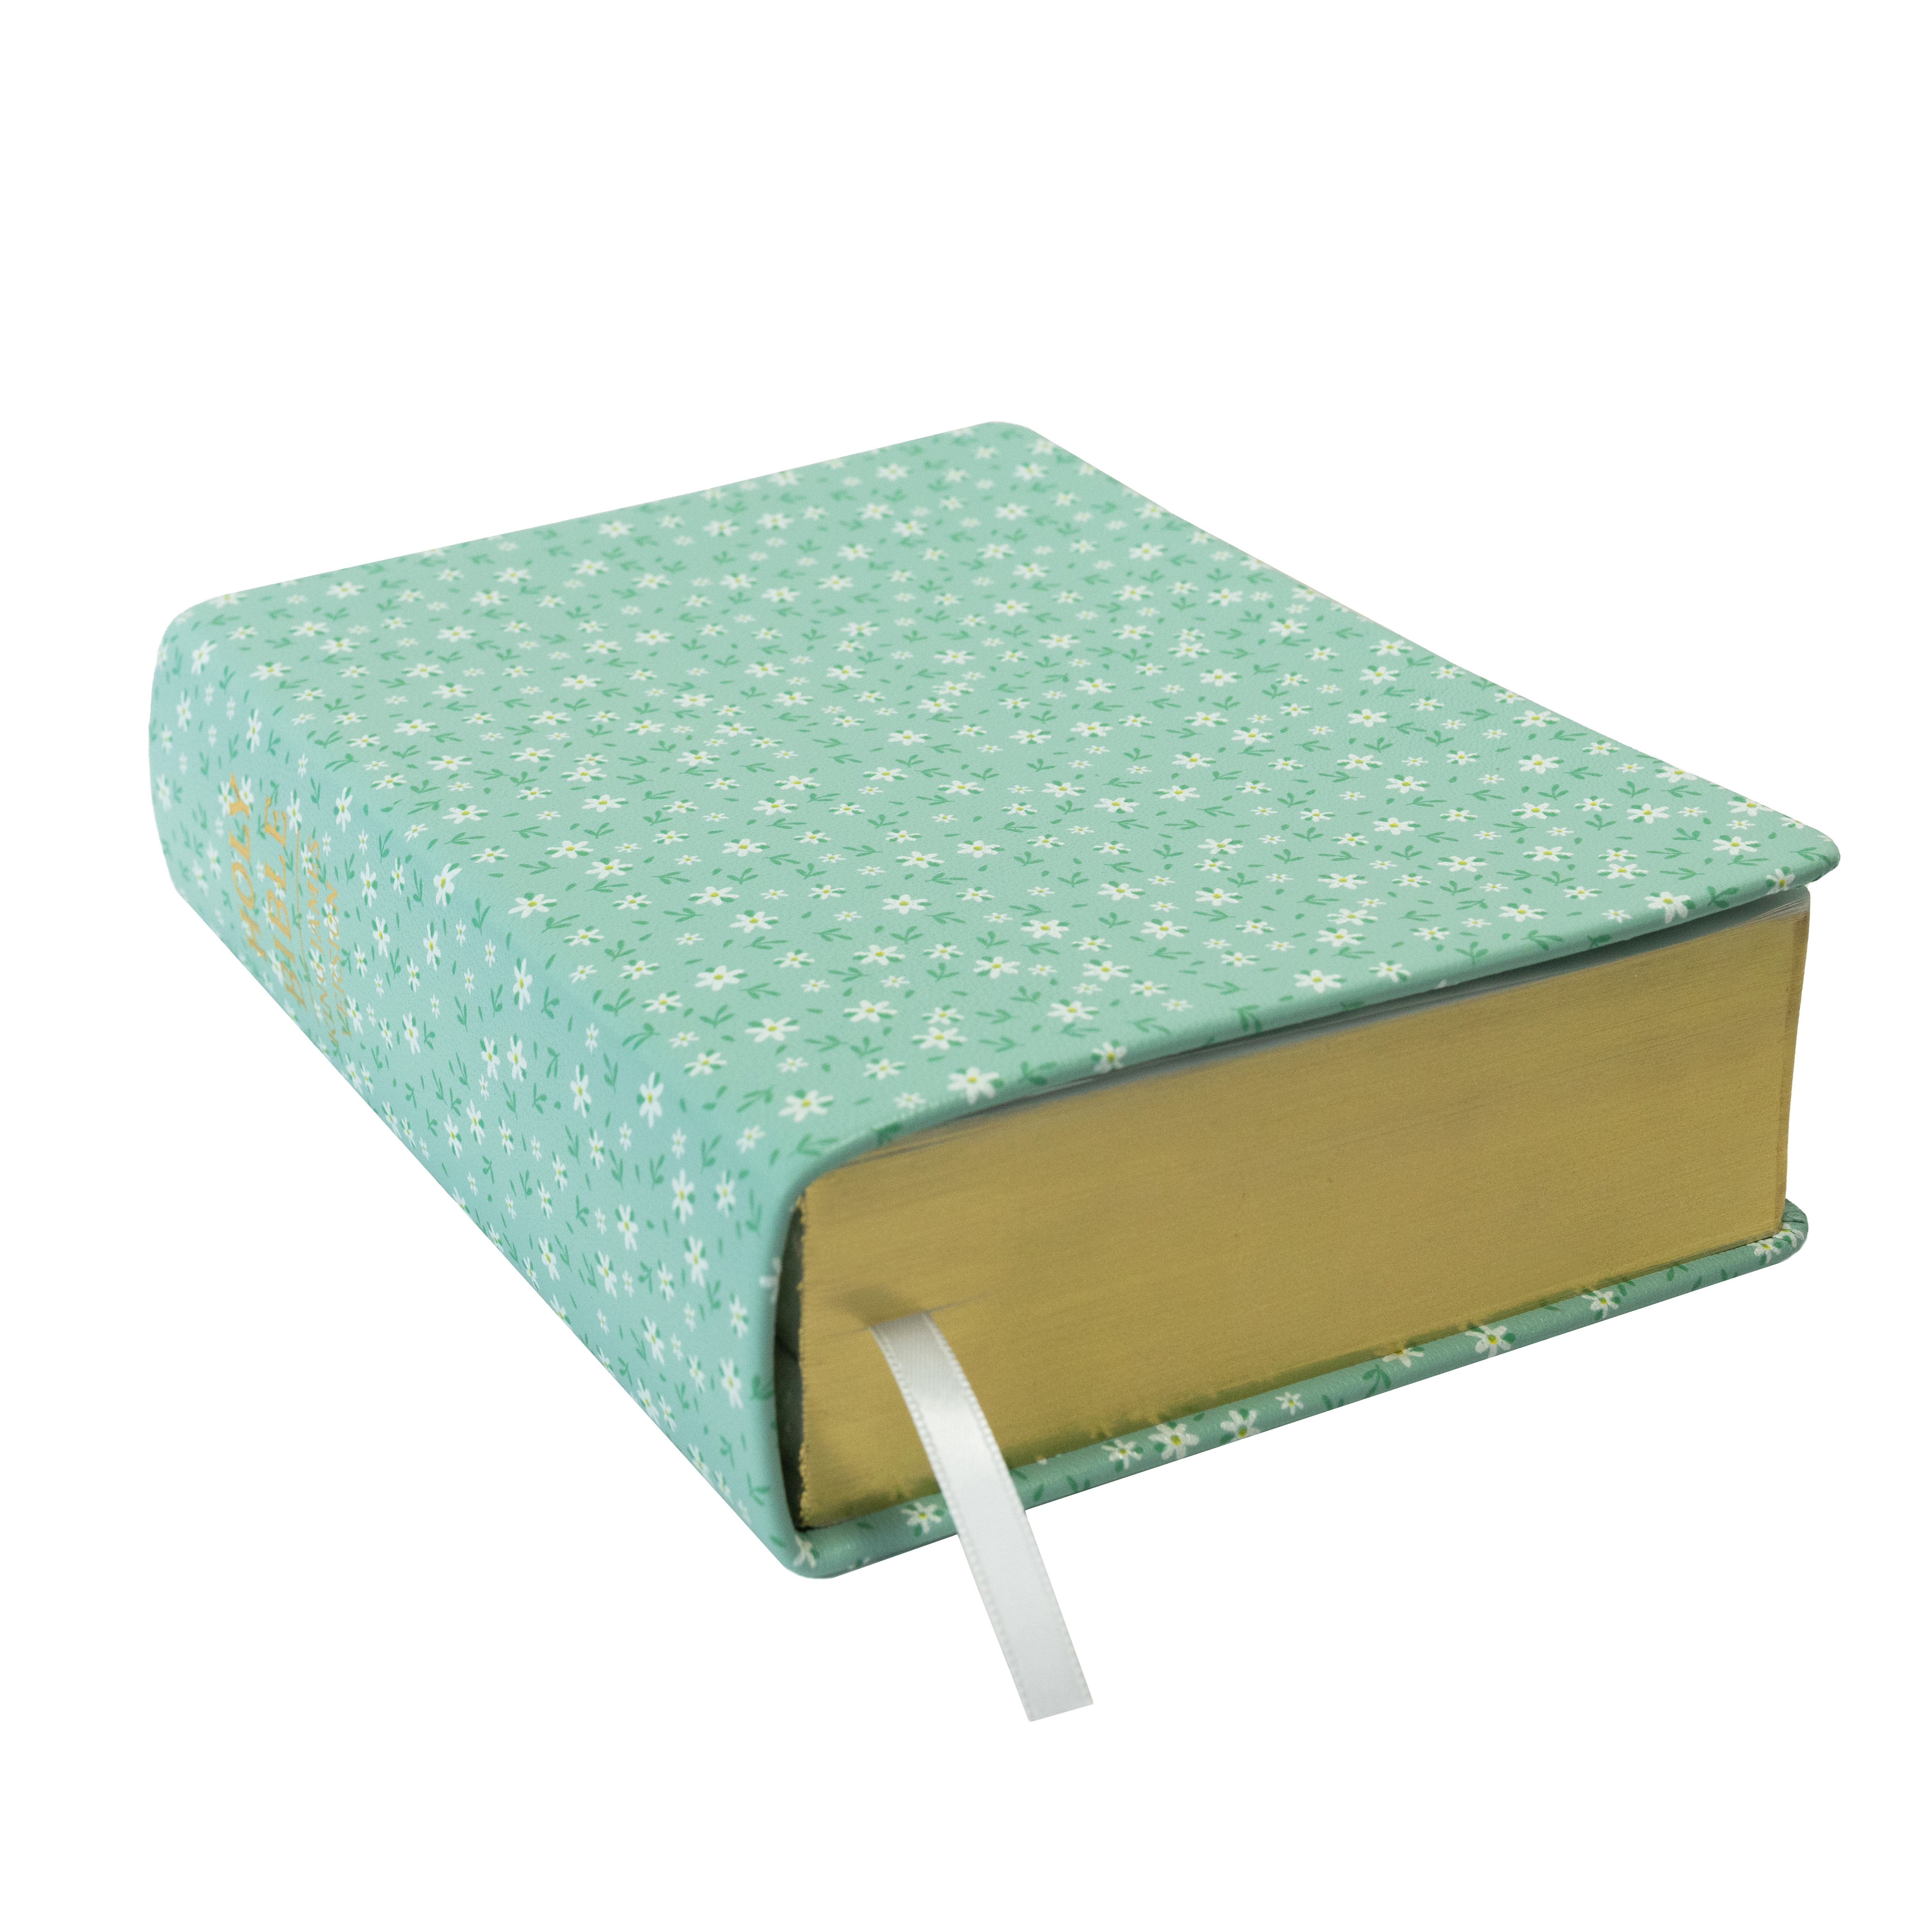 Hand-Bound Genuine Leather Bible - Daisy May (6 Colors) - LDP-HB-PRB-DM